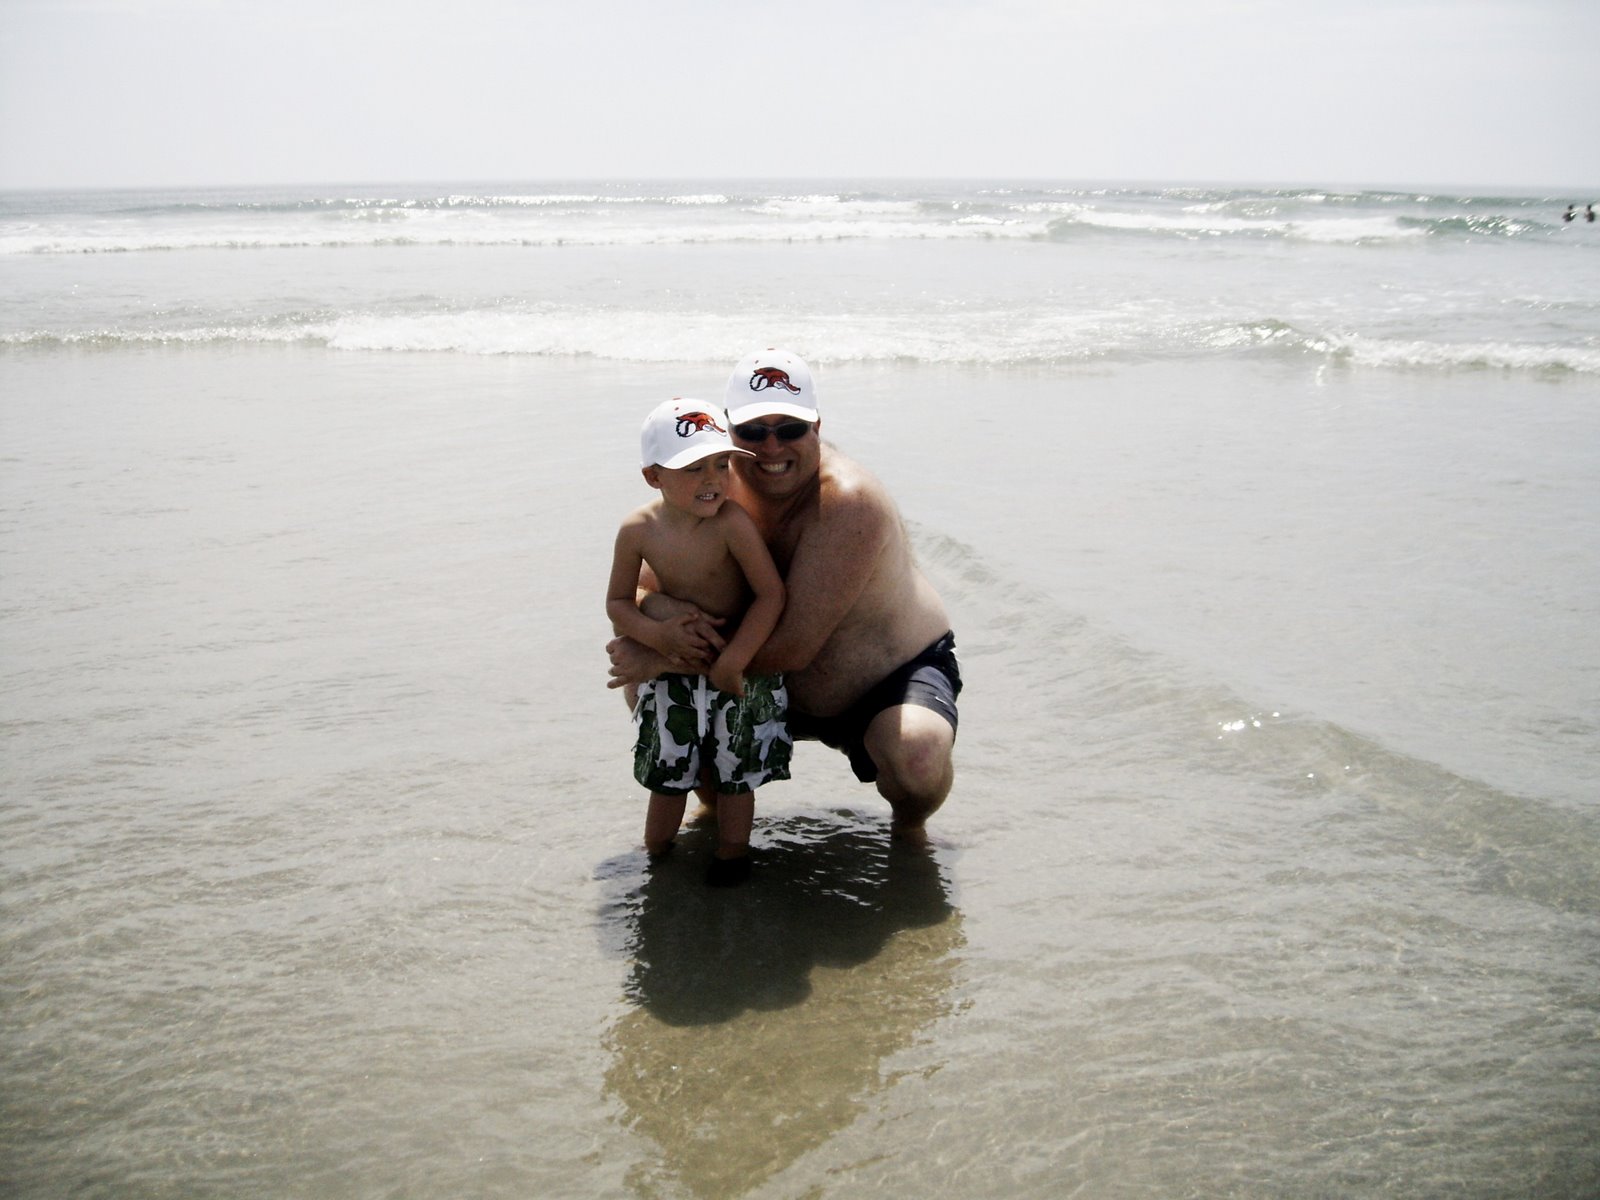 [b+and+daddy+in+the+big+ocean.jpg]